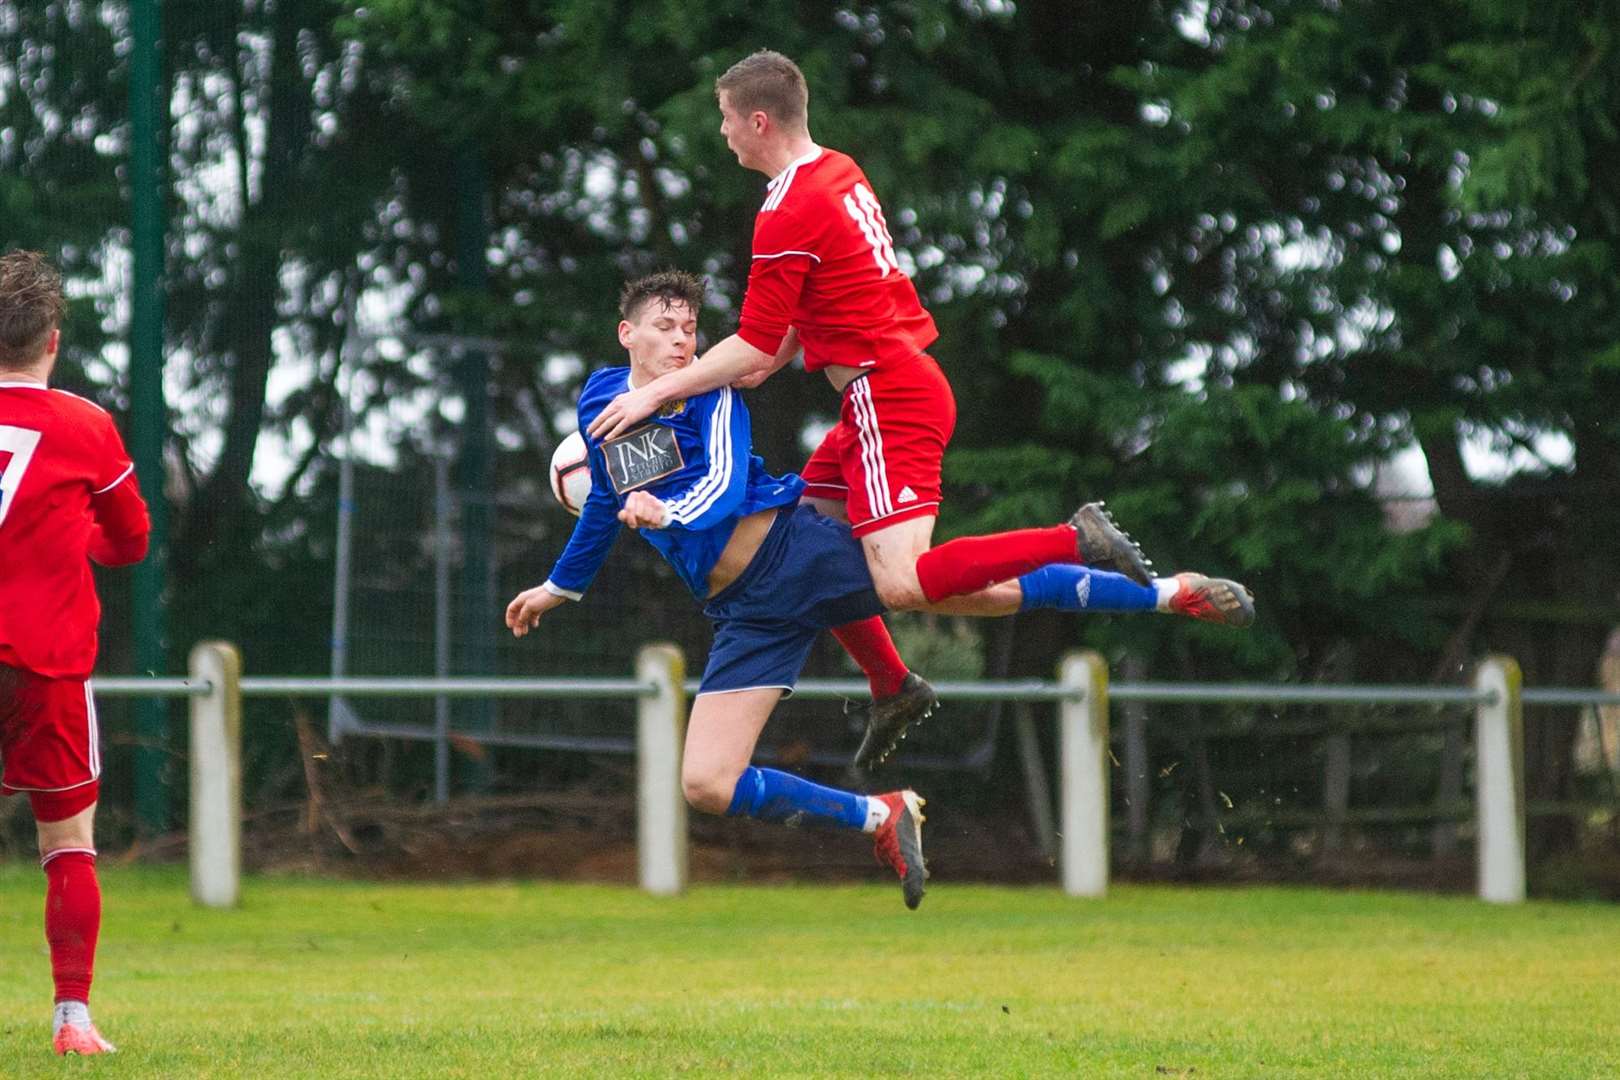 Brandon Hutcheson rises to win a header against Burghead's Jared Kennedy, now of Lossiemouth. Picture: Daniel Forsyth